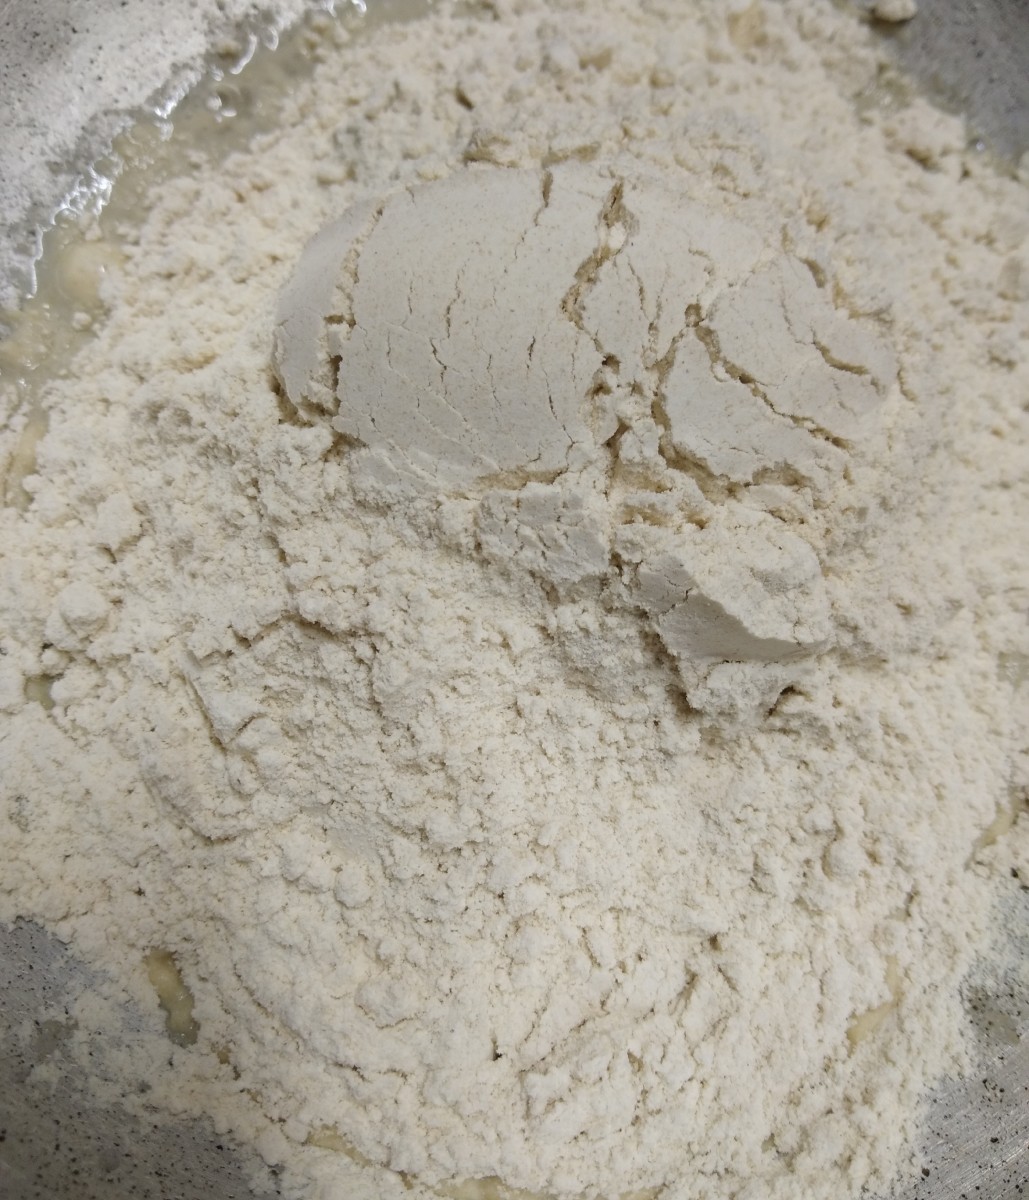 In a wide bowl or pot, take wheat flour, add salt according to taste and mix properly. (You can dissolve salt in 2-3 teaspoons of water and then add wheat flour).